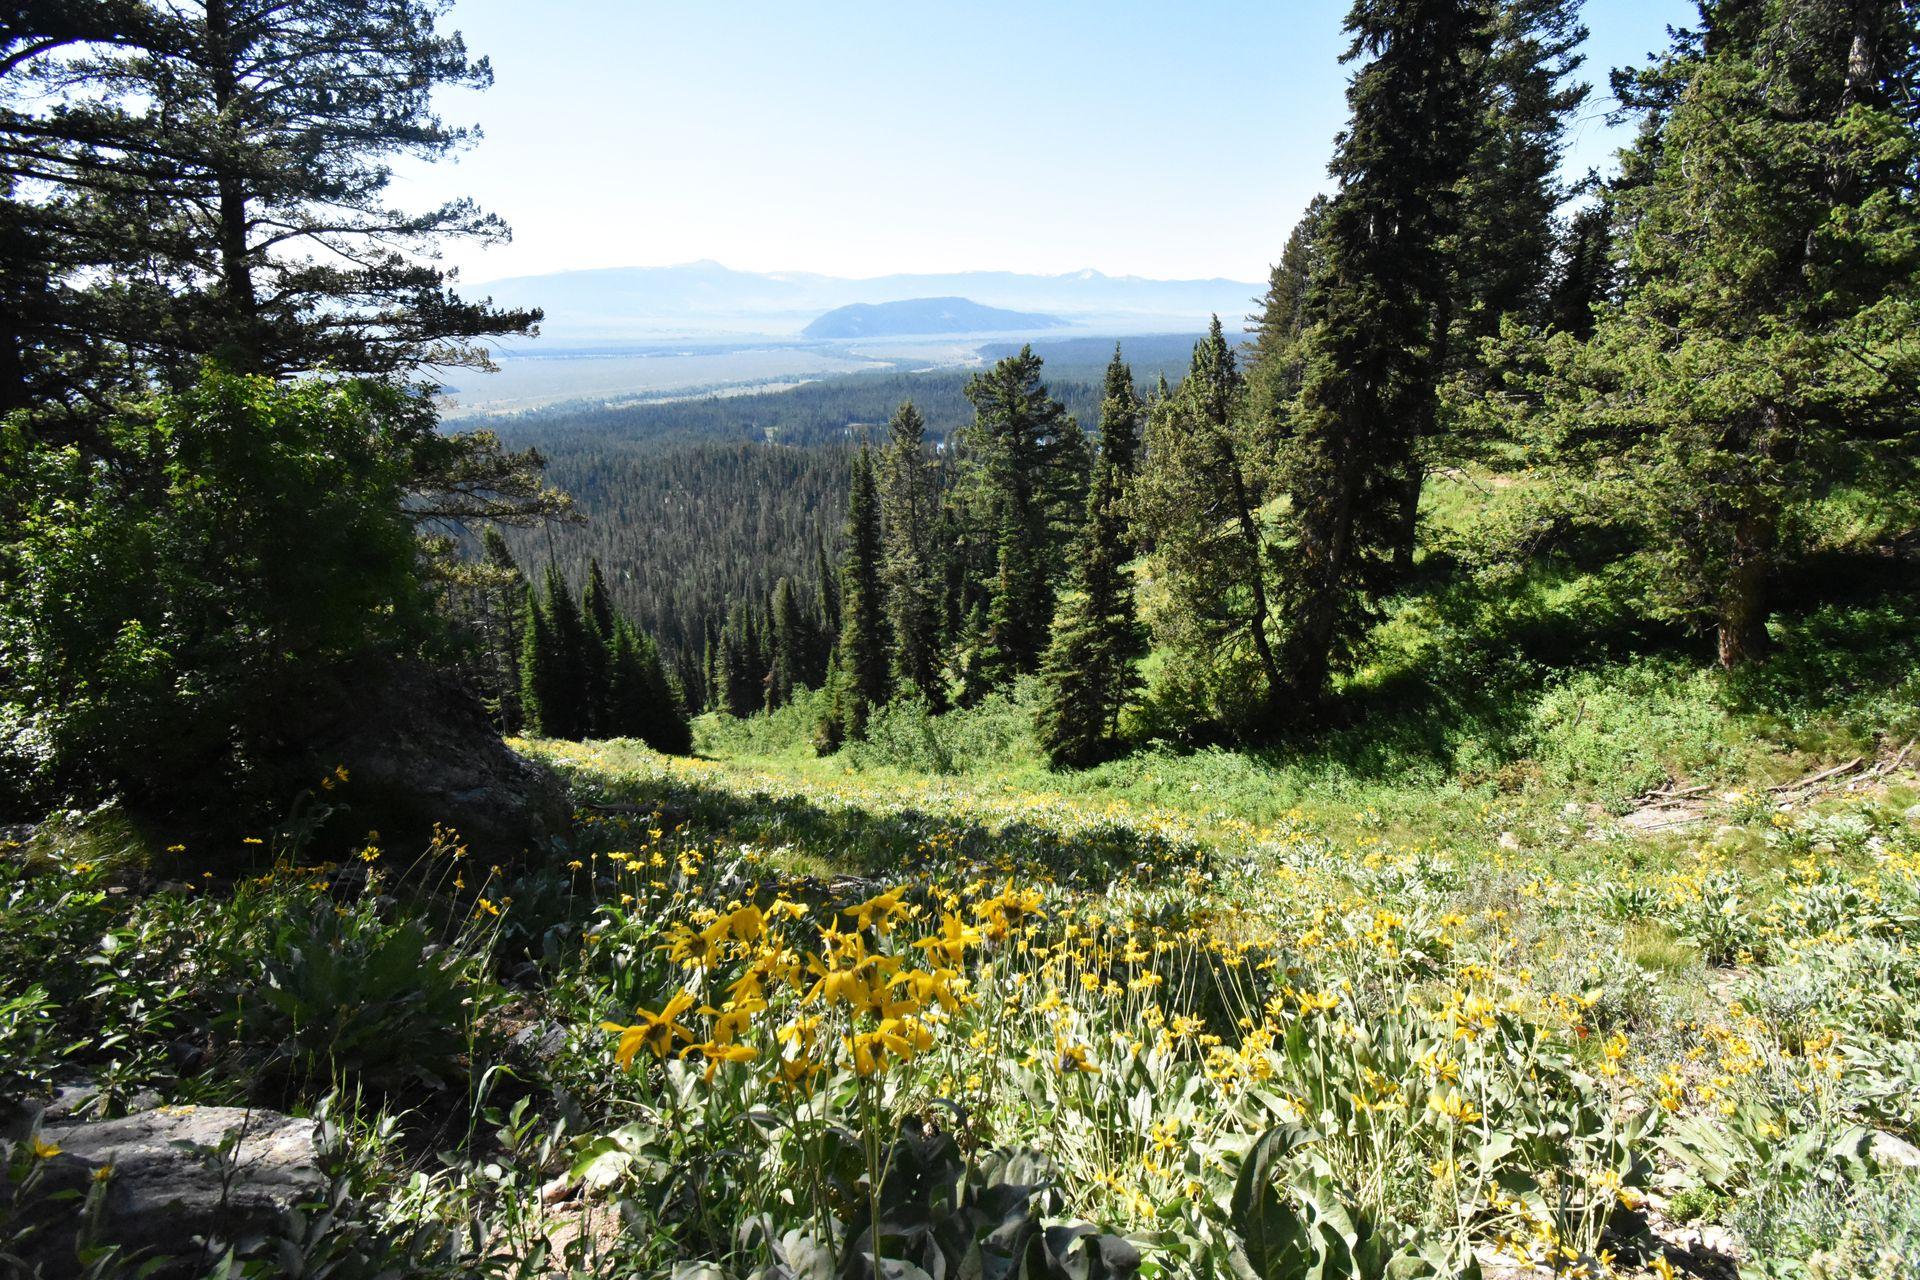 A view of wildflowers, pine trees and the valley in the distance from the hike to Delta Lake.